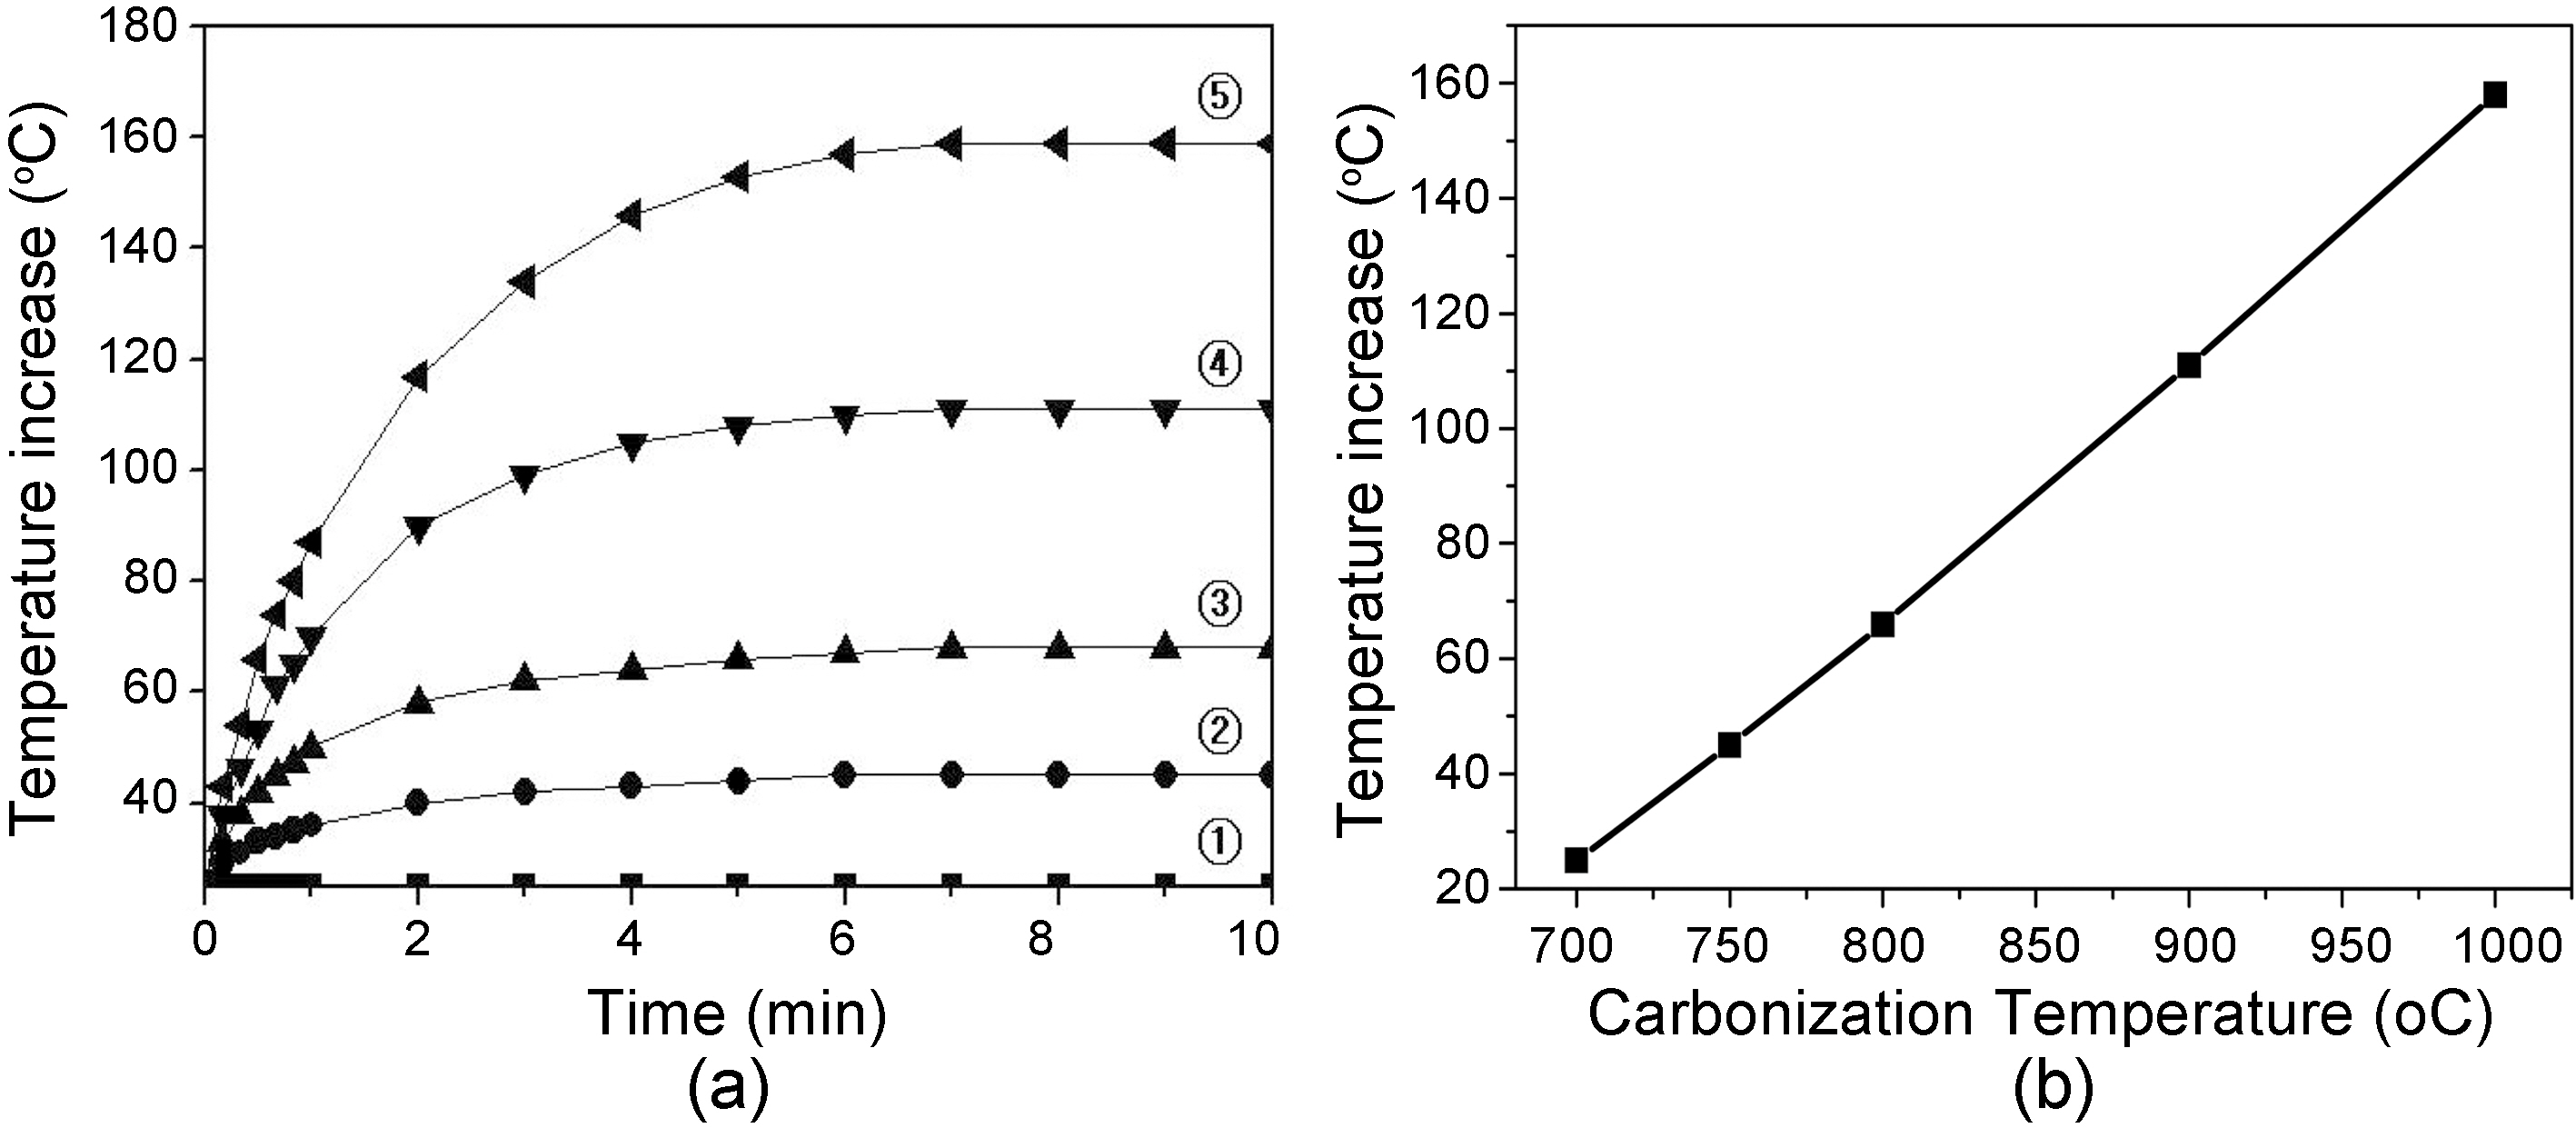 (a) Temperature increase of carbon fiber tows prepared during 1 hr at different carbonization temperatures (①700 ②750 ③800 ④900 and ⑤1000℃) as a function of contact time at 5 V and (b) relationship between temperature increase and carbonization temperature at 10 min contact time of Fig. 5(a).